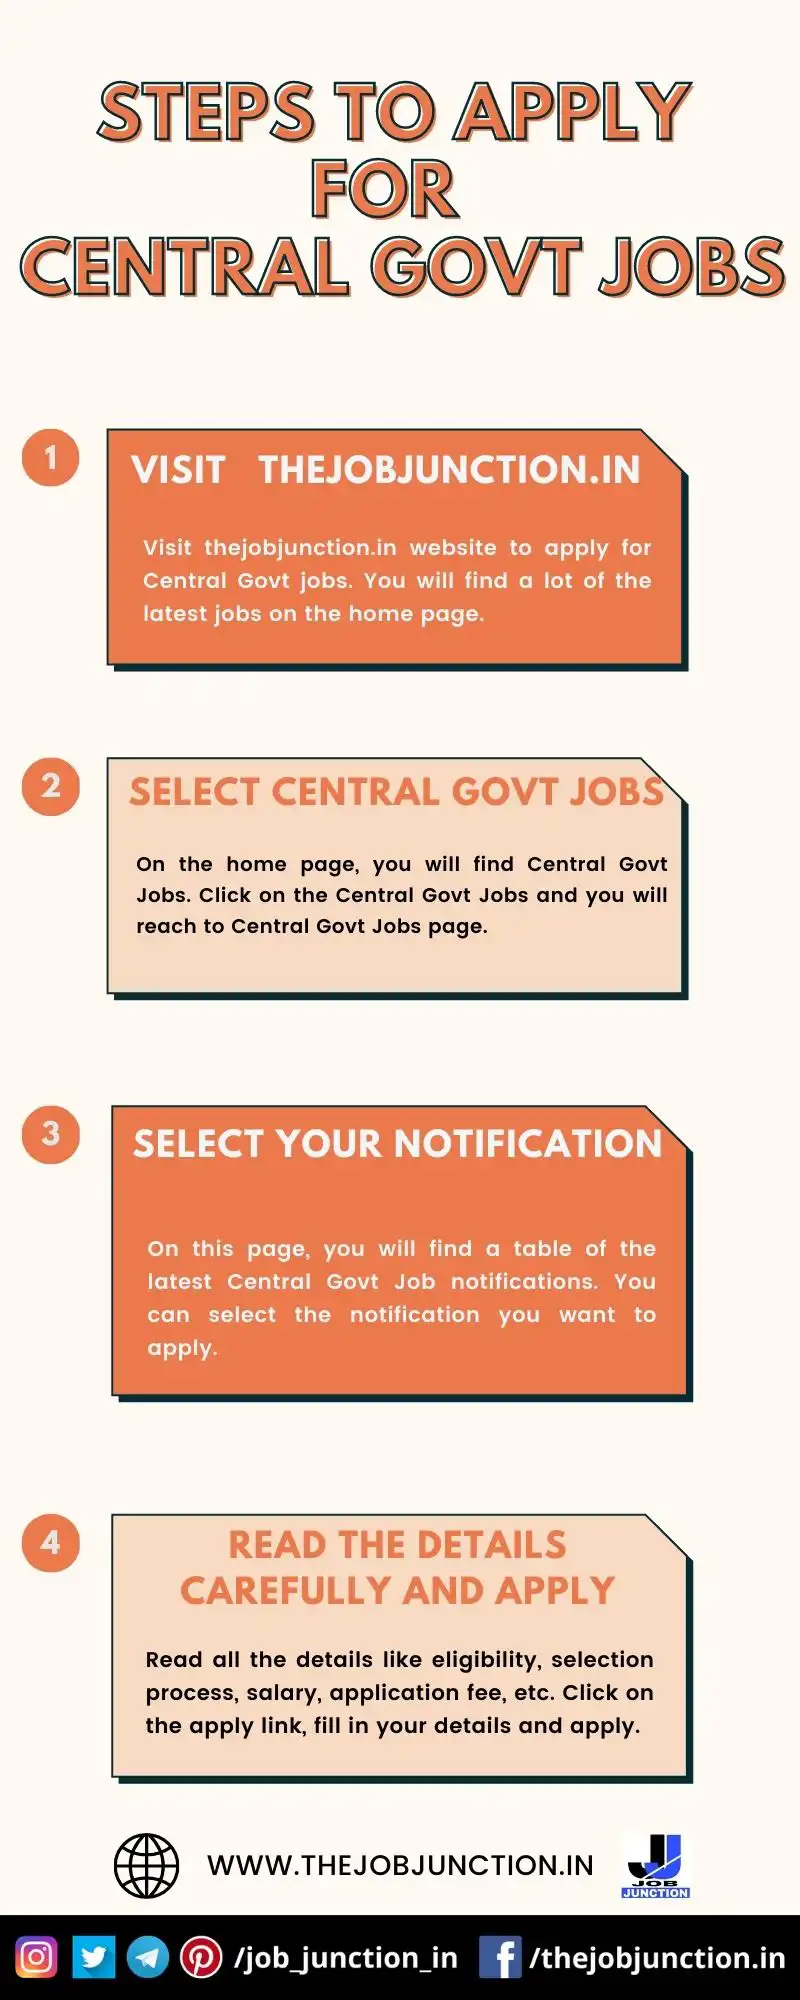 STEPS TO APPLY FOR CENTRAL GOVT JOBS